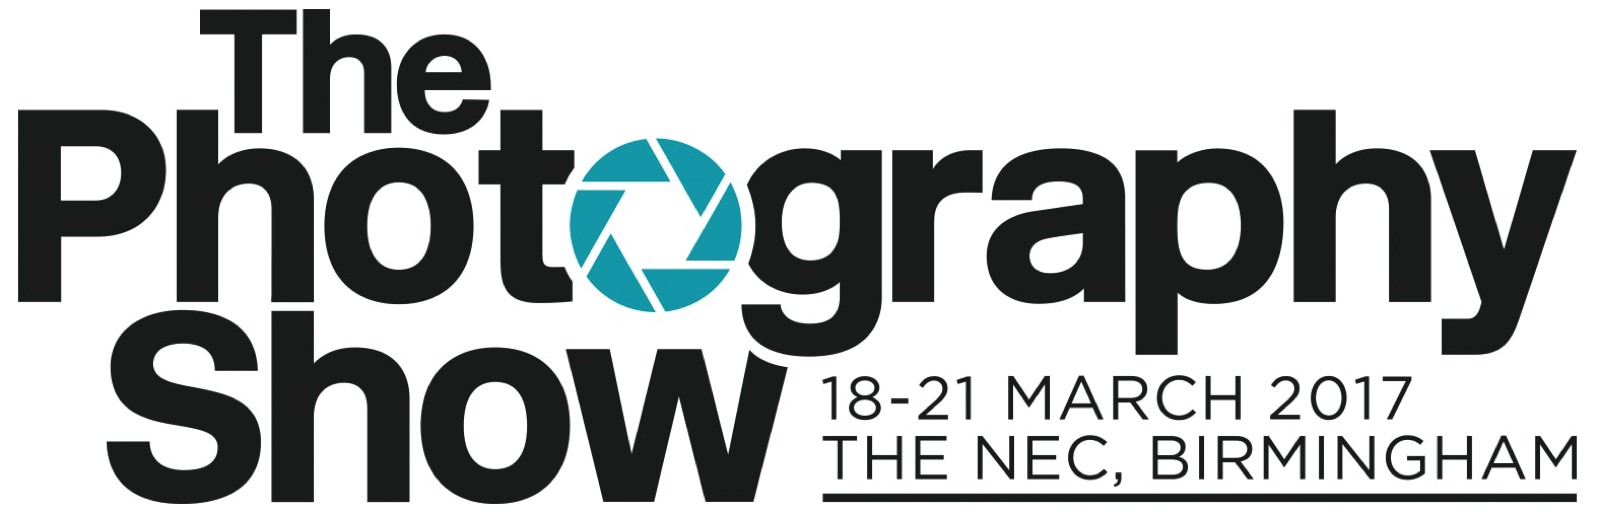 The Photography Show 2017